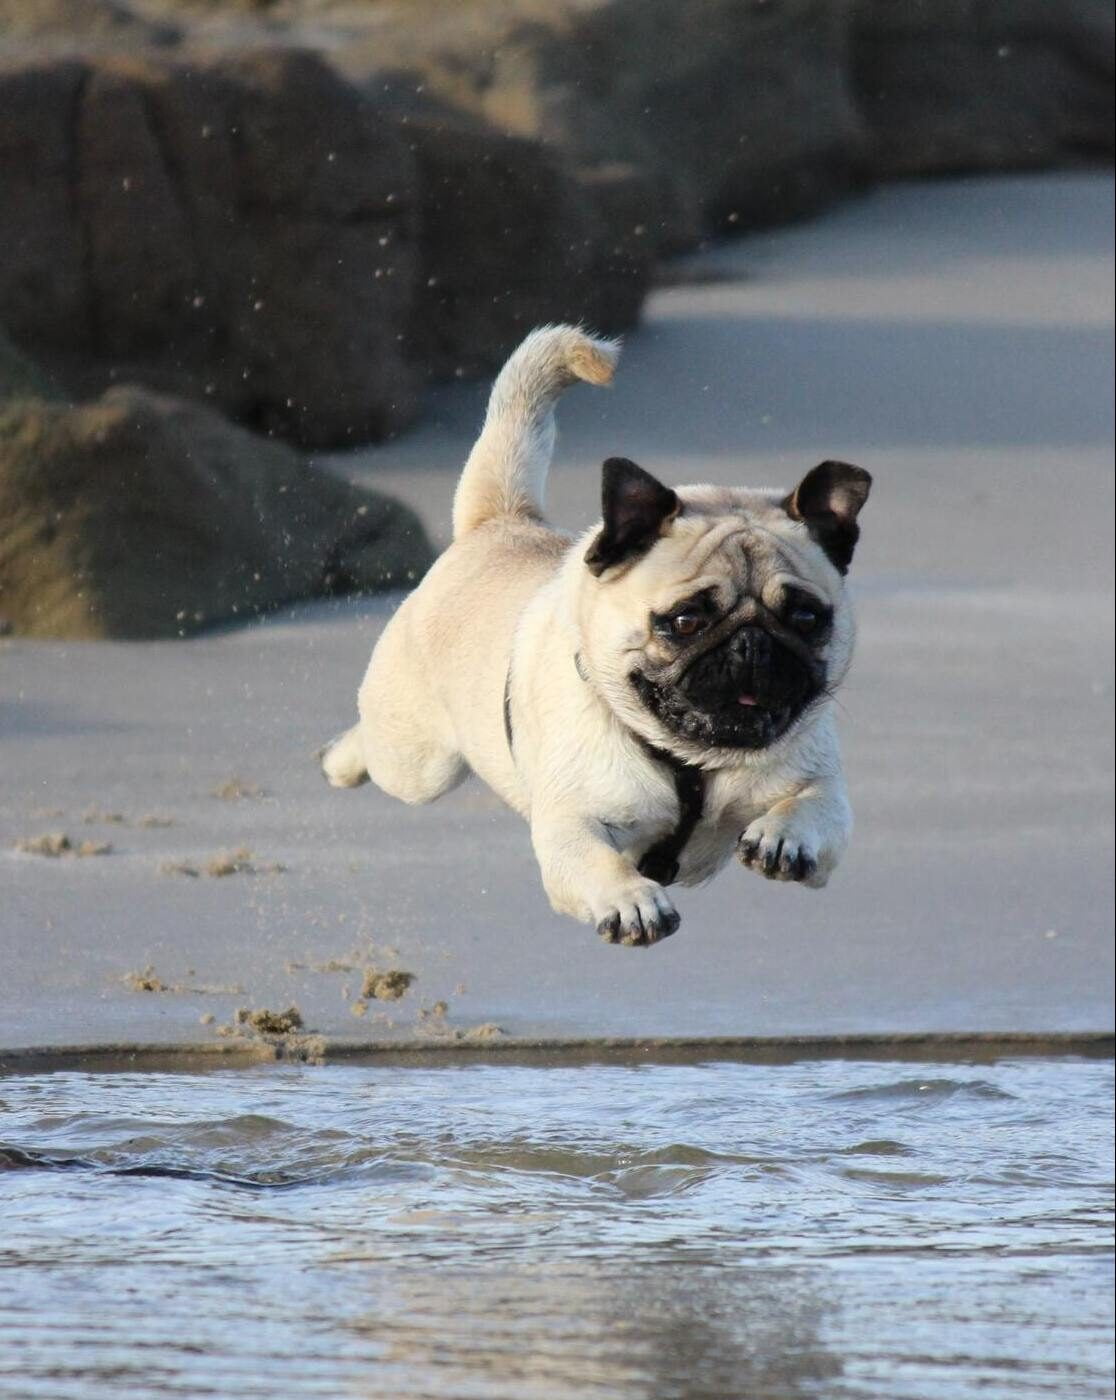 Pug running and jumping on beach